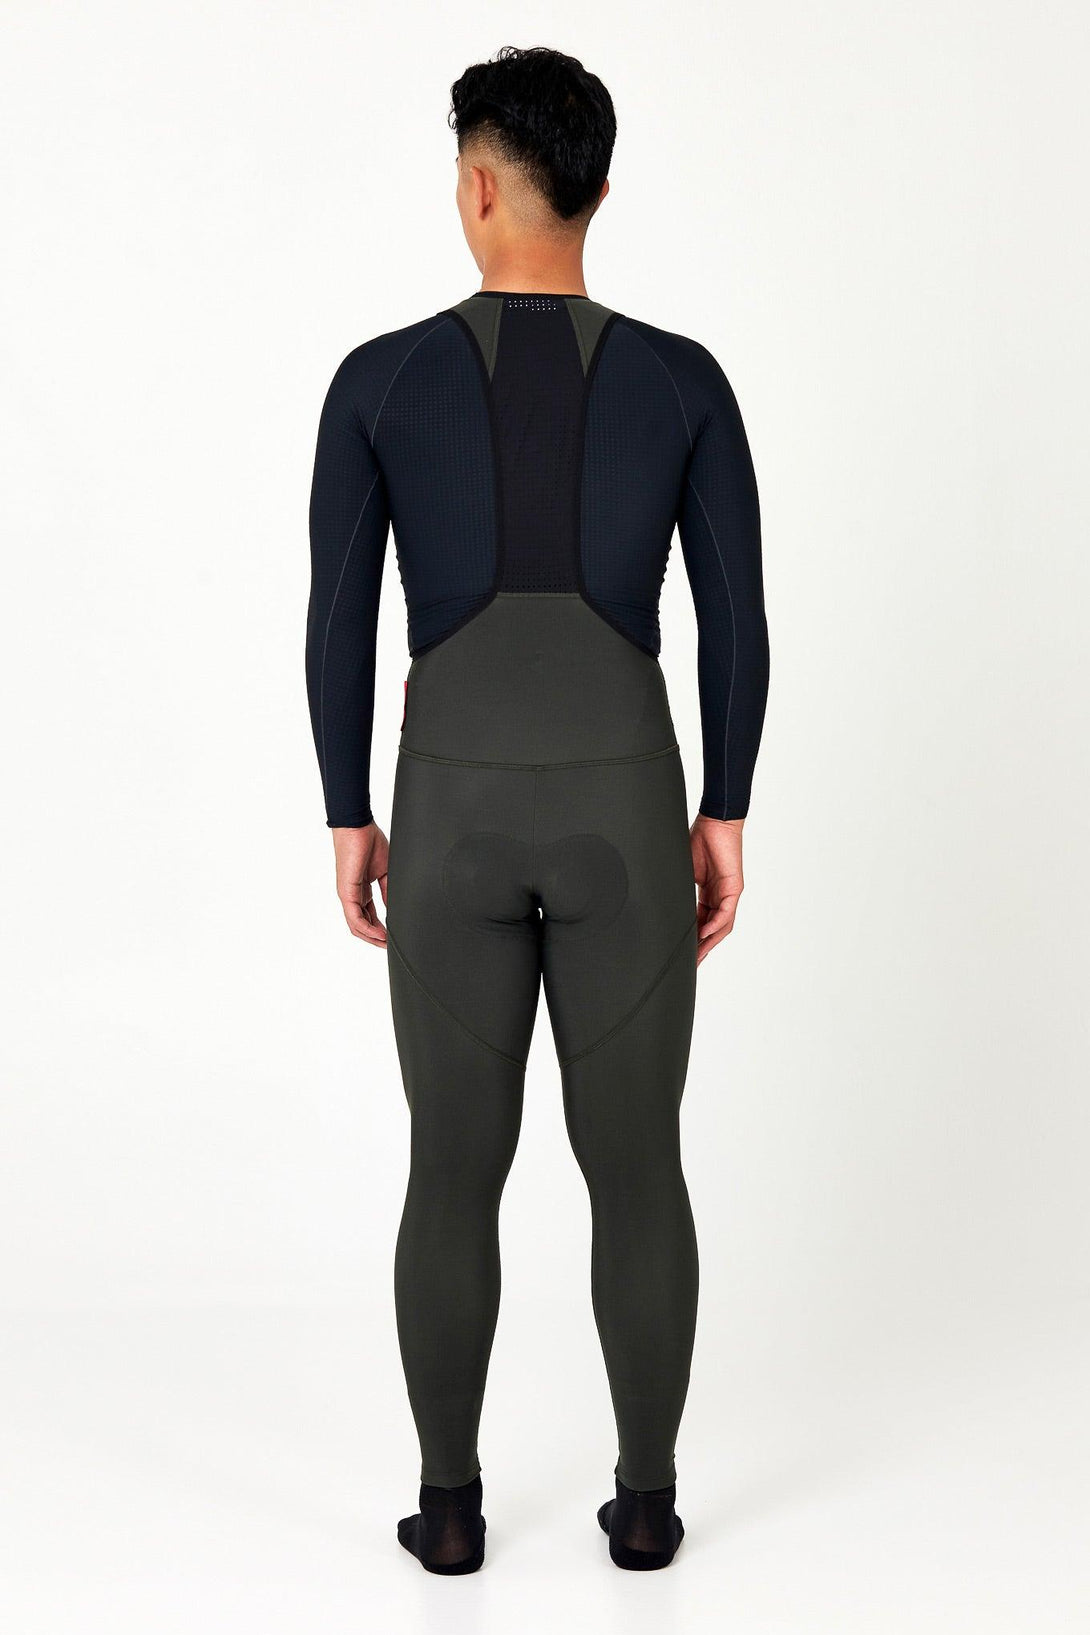 Culotte Largo Factory Thermal Hombre - Twenty One Cycling